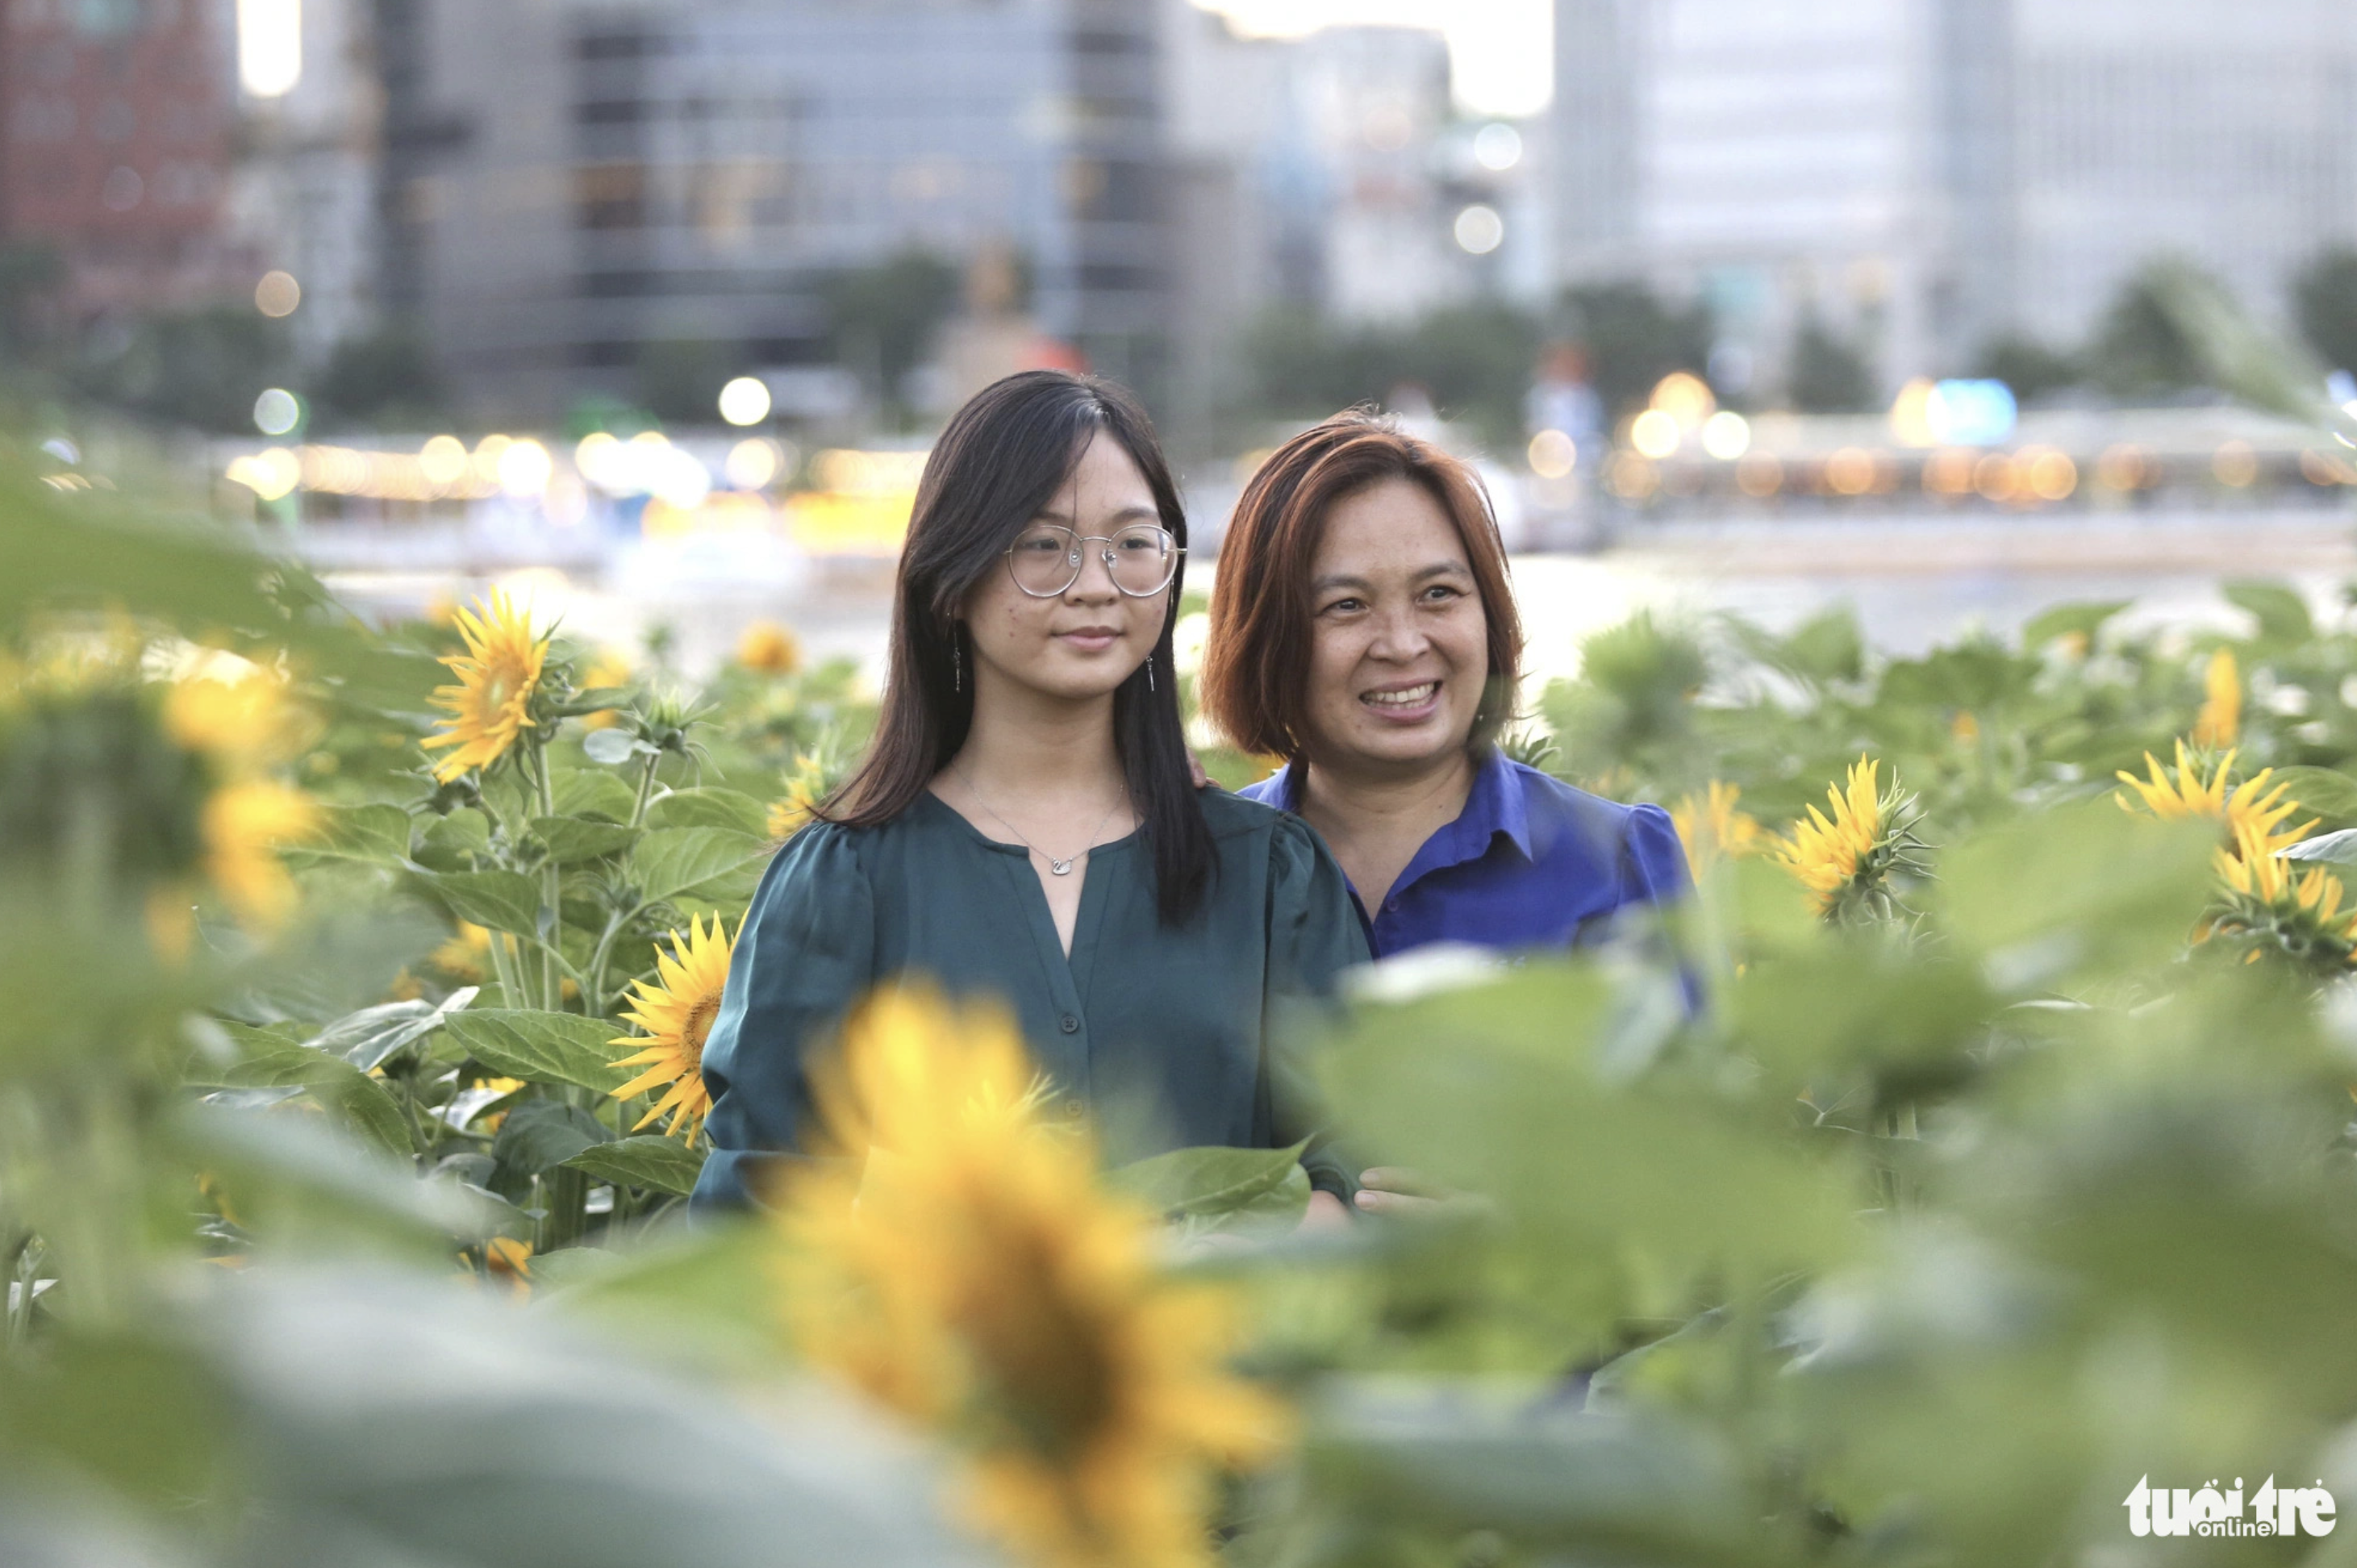 Mai Lan and her daughter take a photo with sunflowers at Saigon Riverbank Park in Thu Duc City, Ho Chi Minh City. Photo: Phuong Quyen / Tuoi Tre